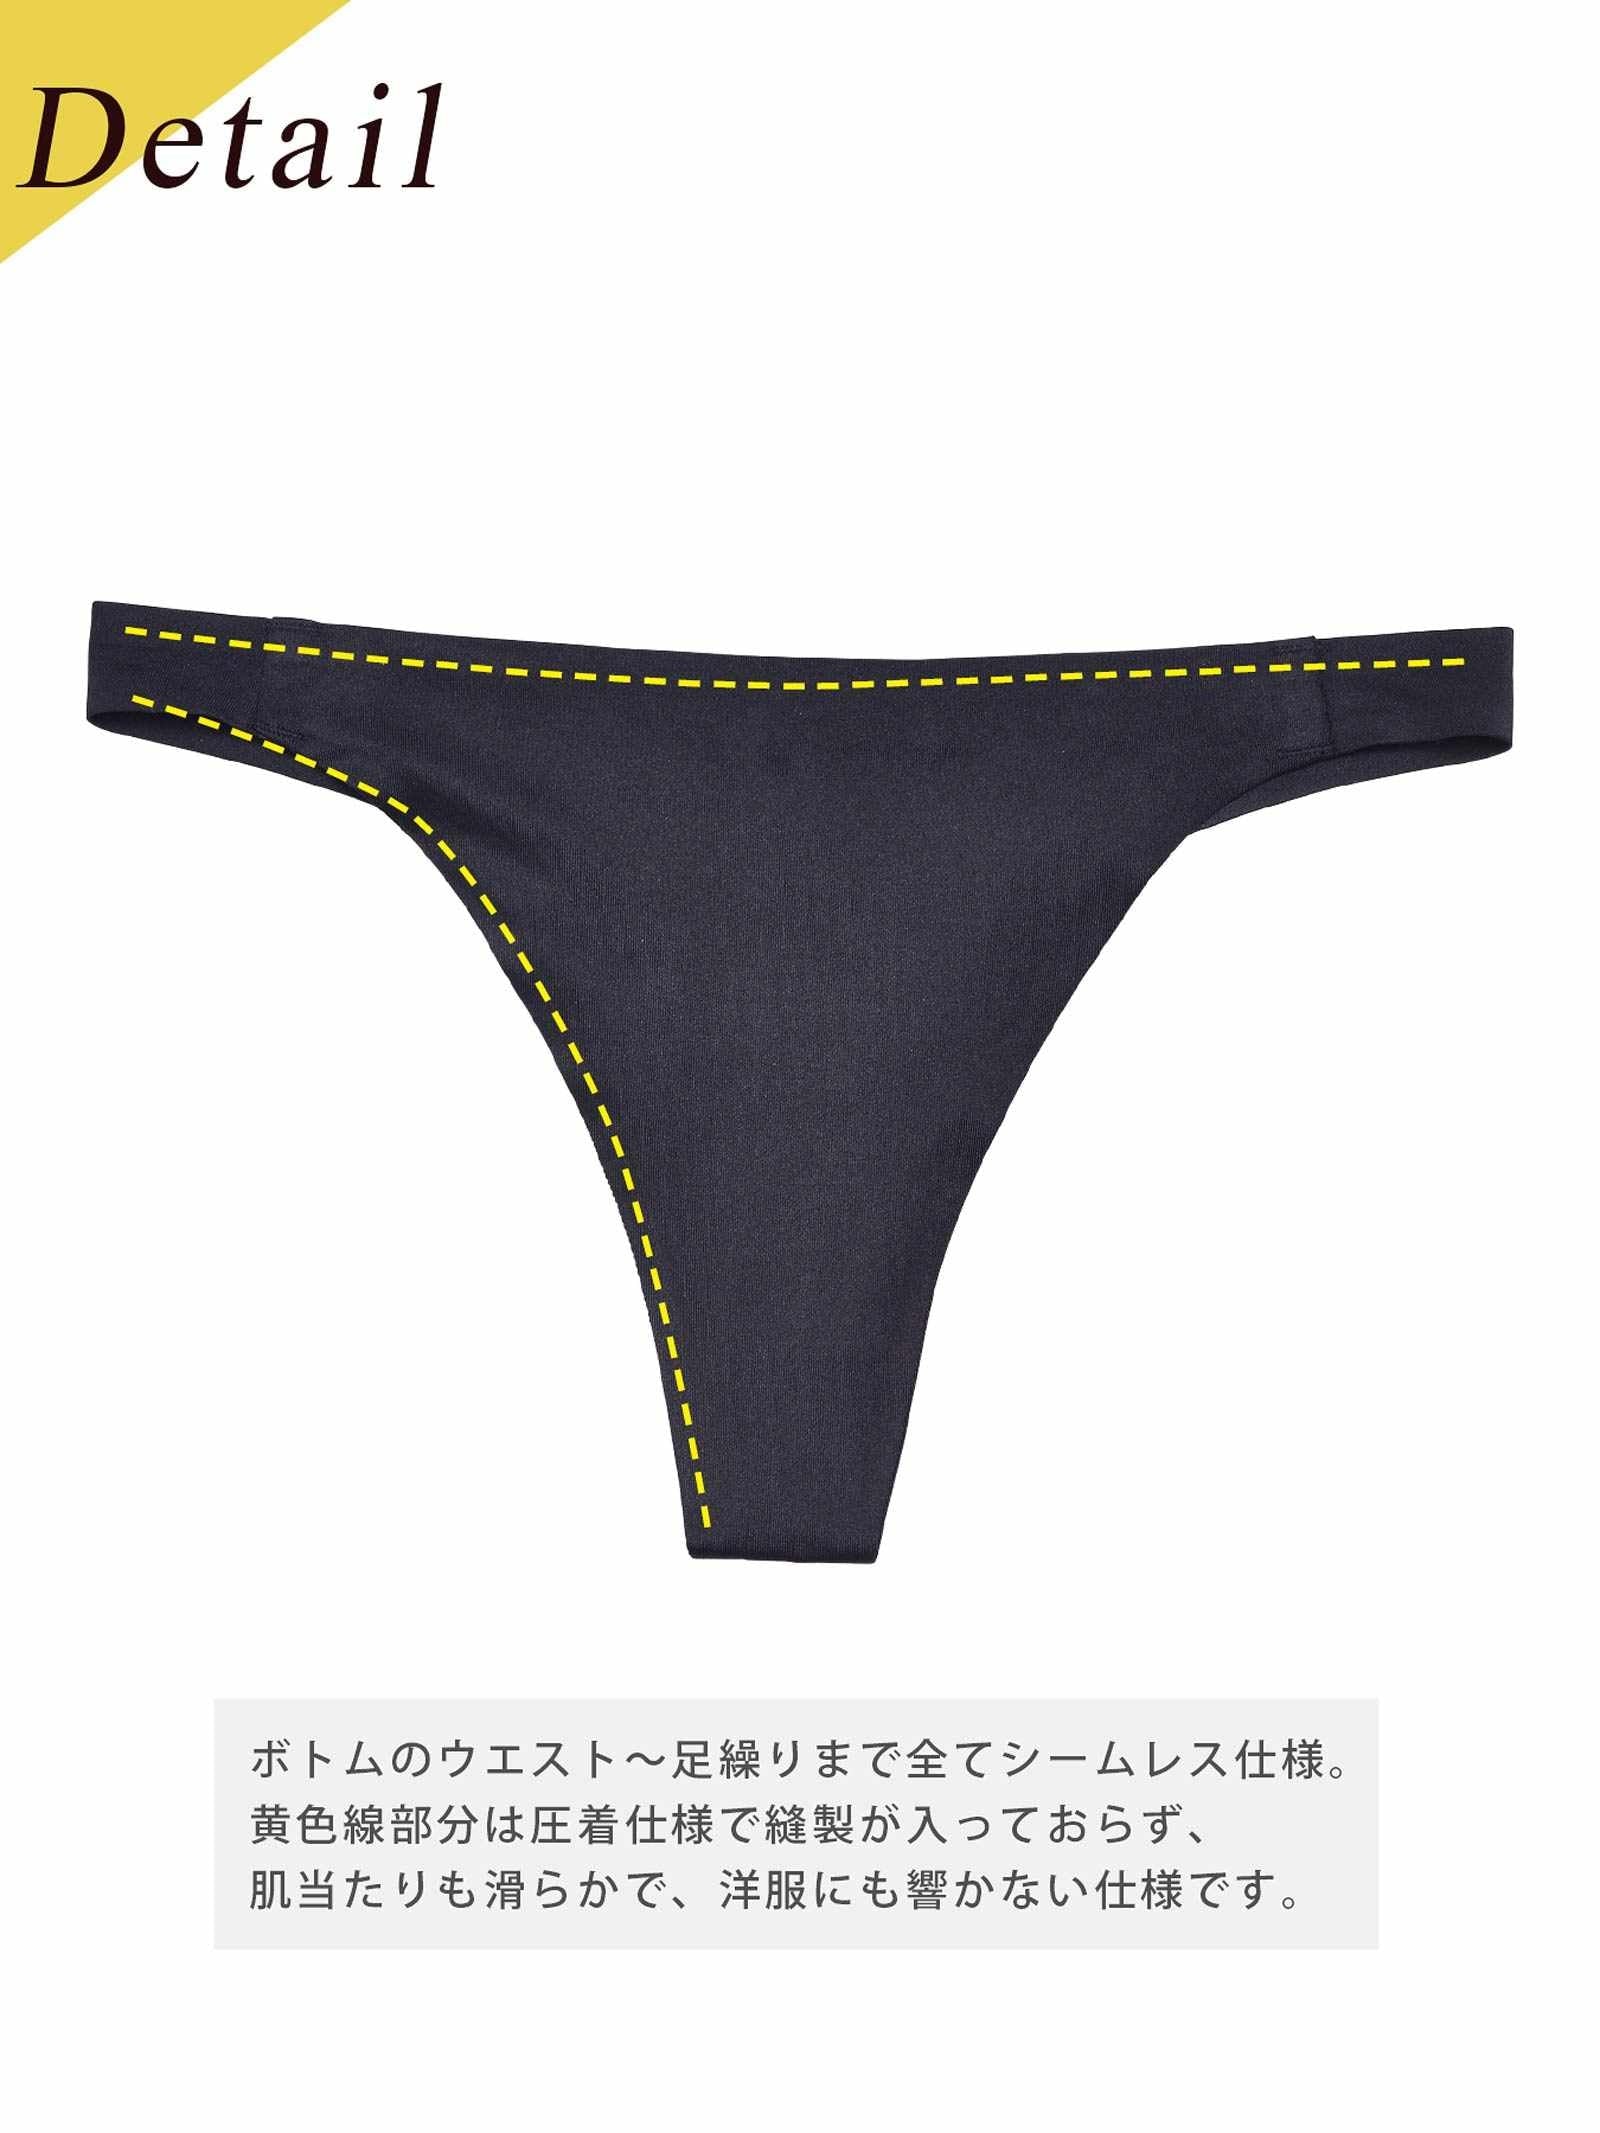 【Re；by Reinest】DIVA BRA series Seamless Shorts シームレスショーツ/ 3color set